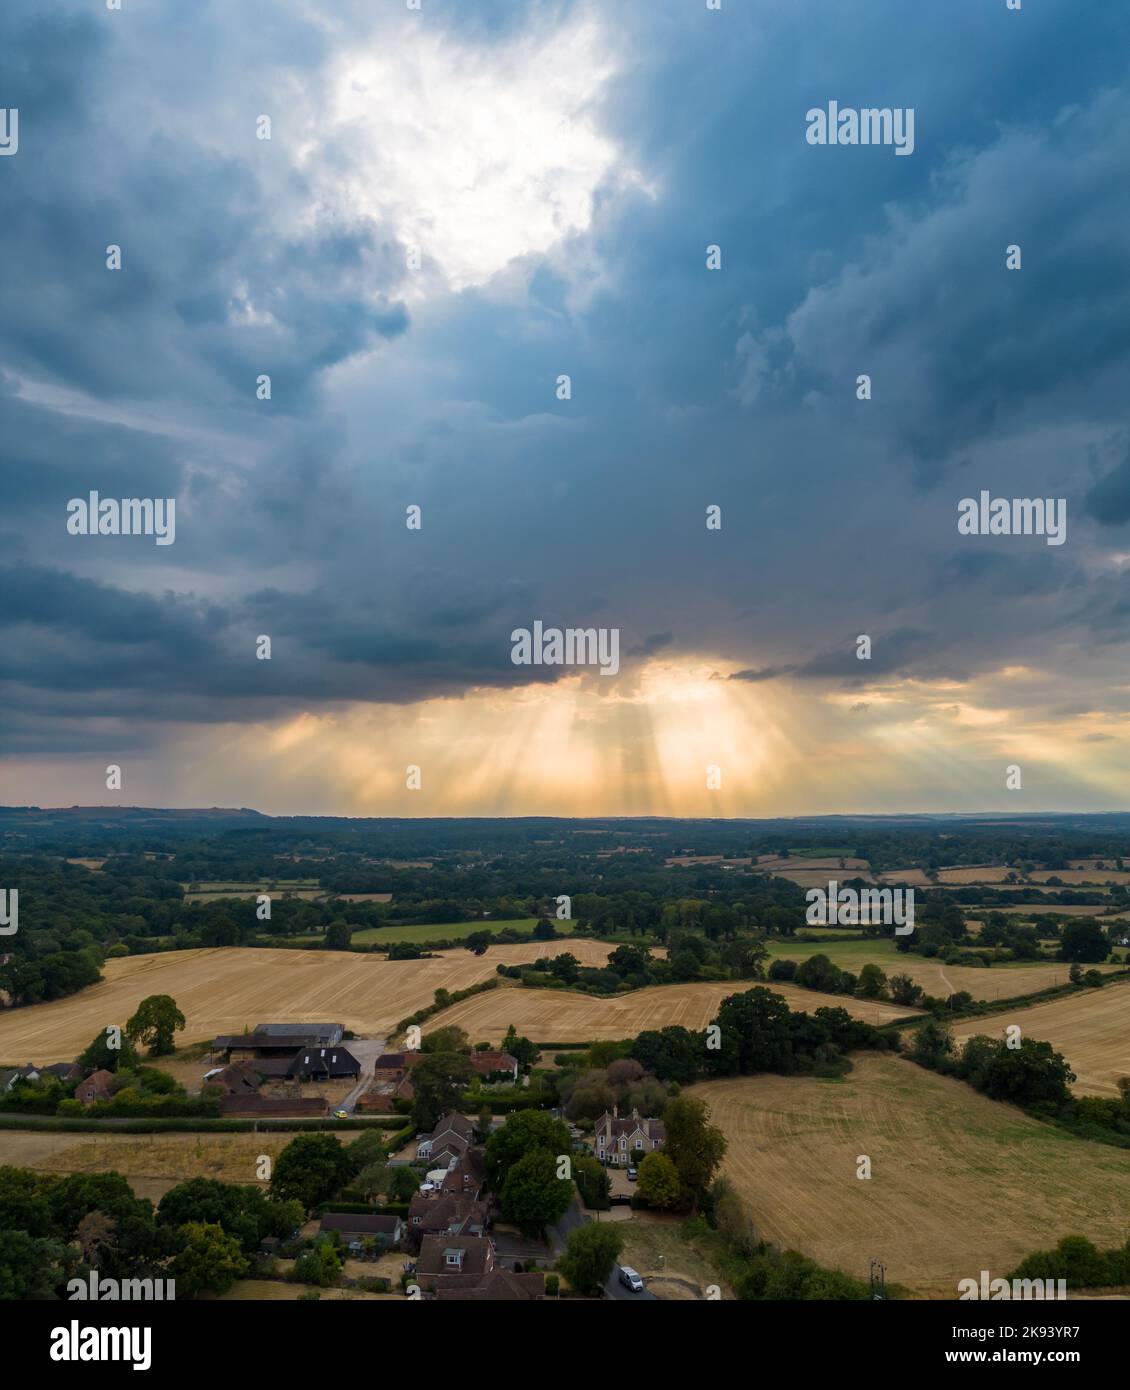 Stunning aerial landscape image of the sun’s rays shining through gap in clouds onto English countryside captured by drone in portrait mode Stock Photo